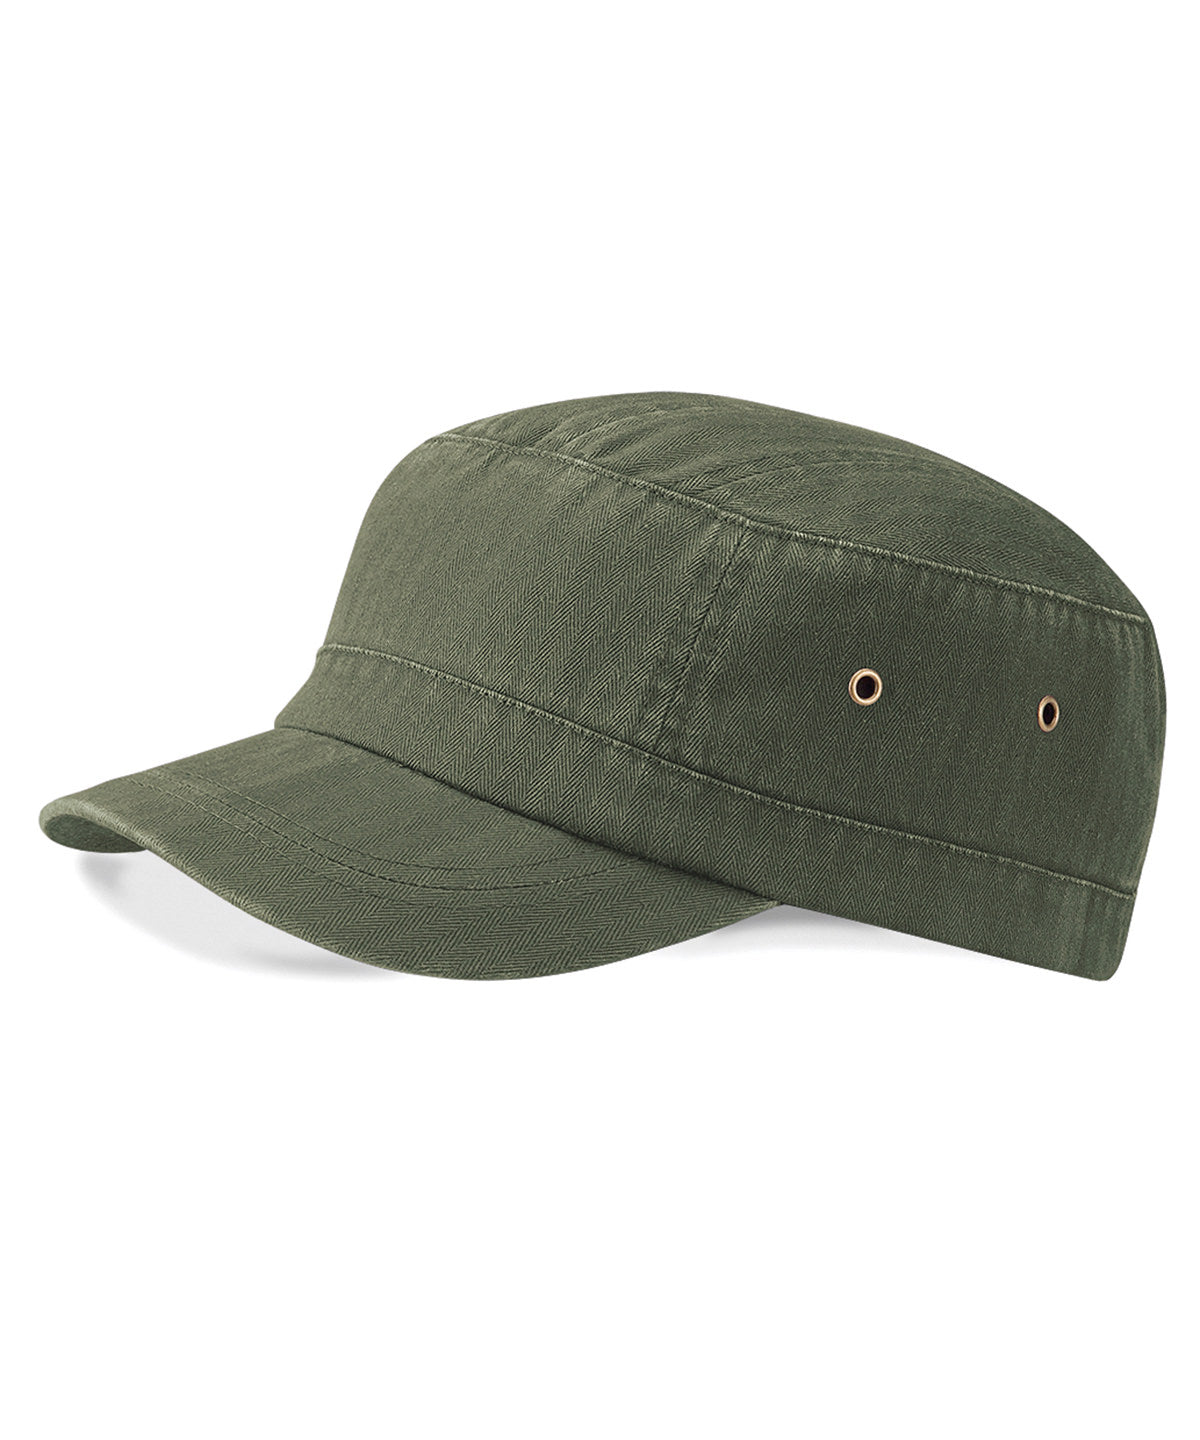 Personalised Caps - Olive Beechfield Urban Army cap